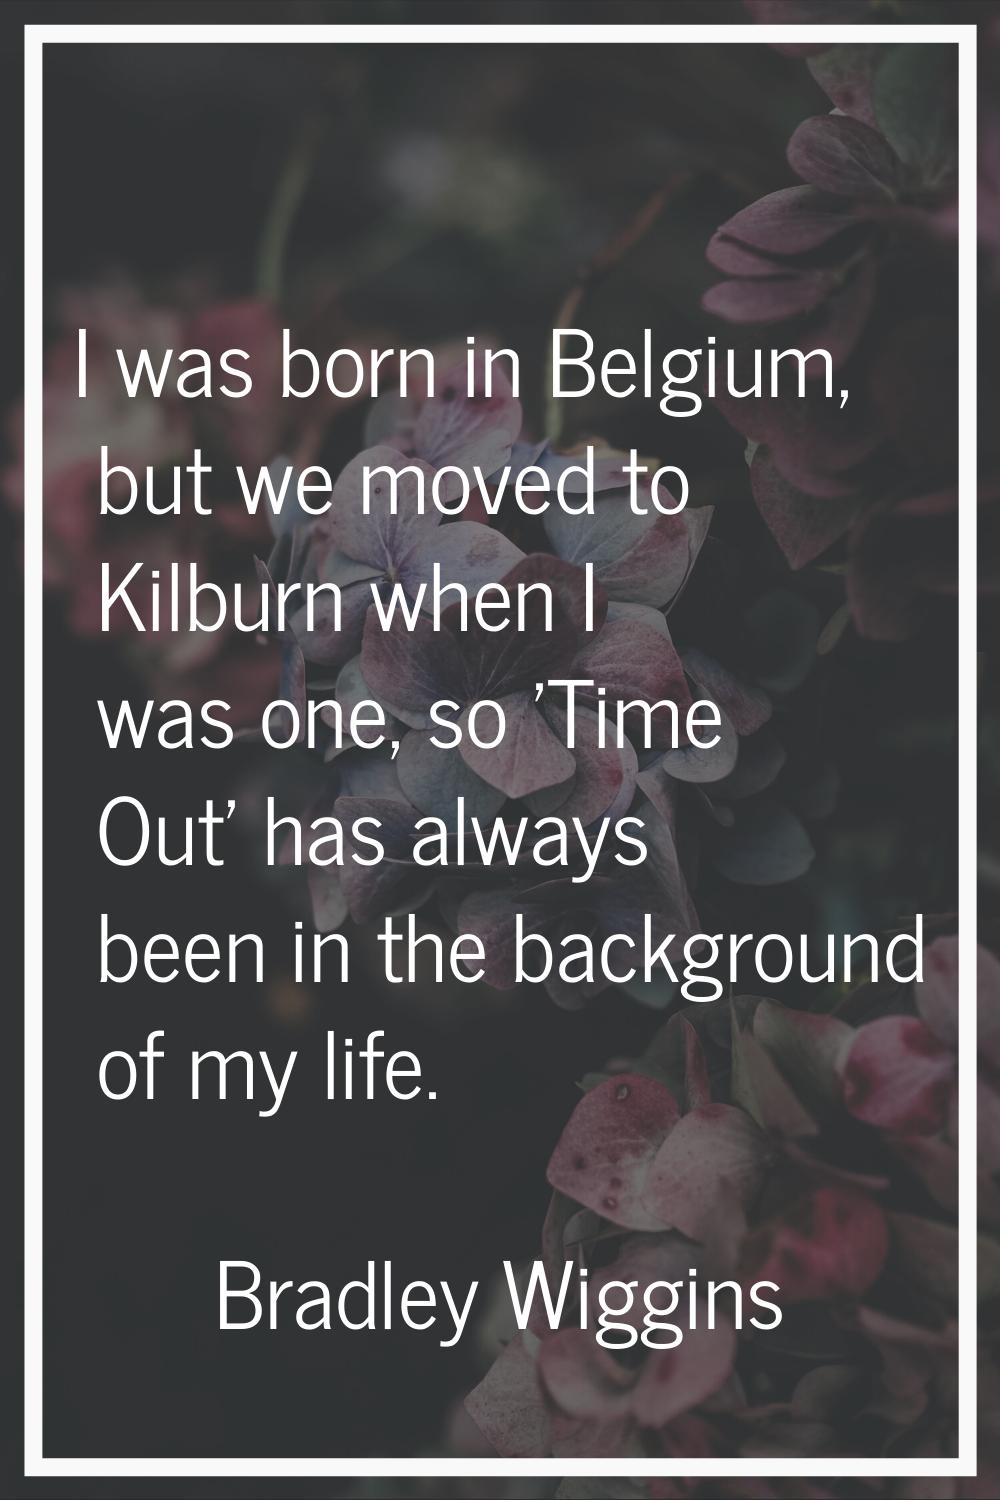 I was born in Belgium, but we moved to Kilburn when I was one, so 'Time Out' has always been in the